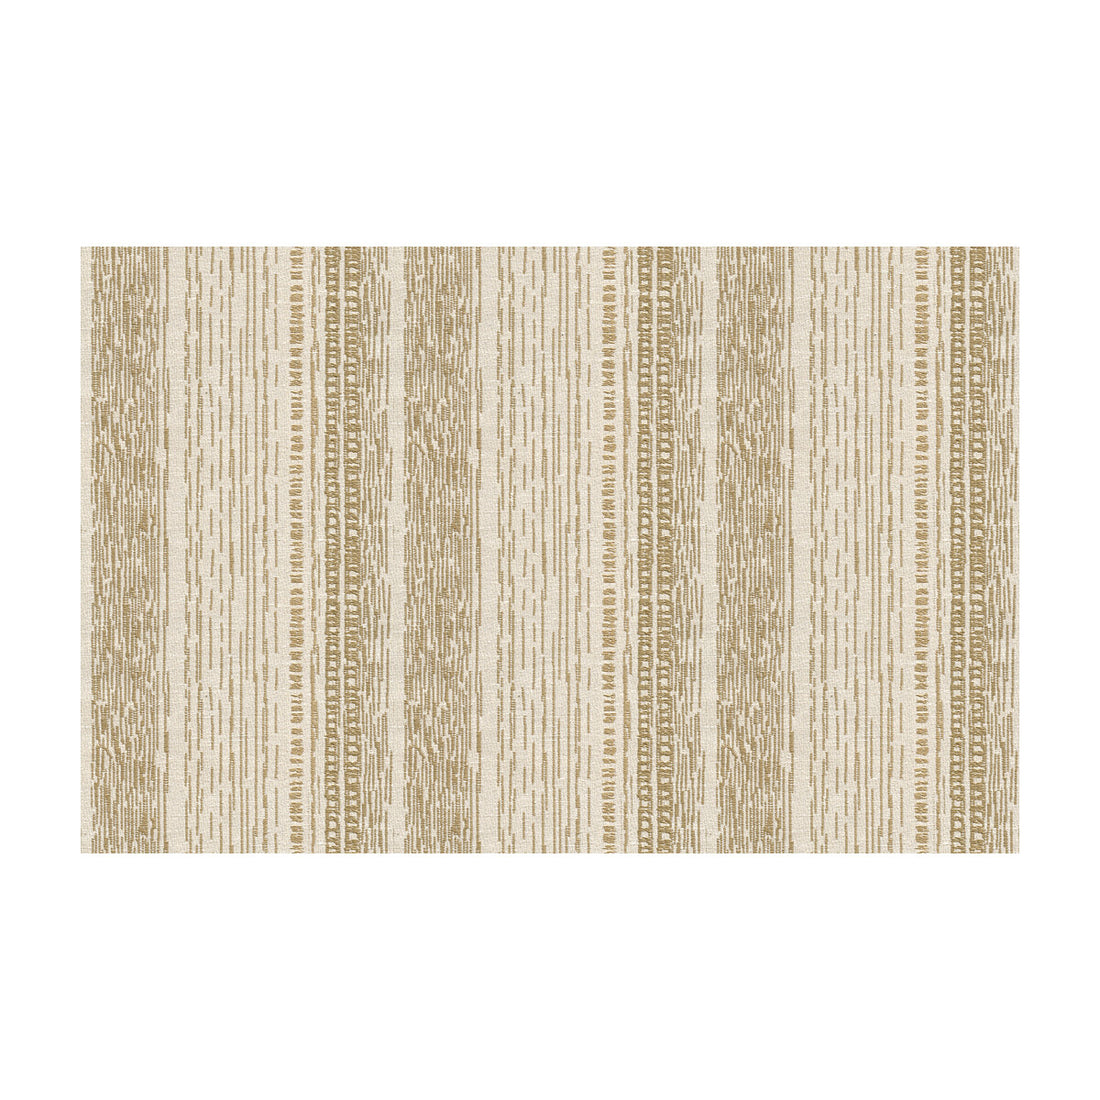 Slauson fabric in sand color - pattern 33412.16.0 - by Kravet Basics in the Jeffrey Alan Marks Waterside collection